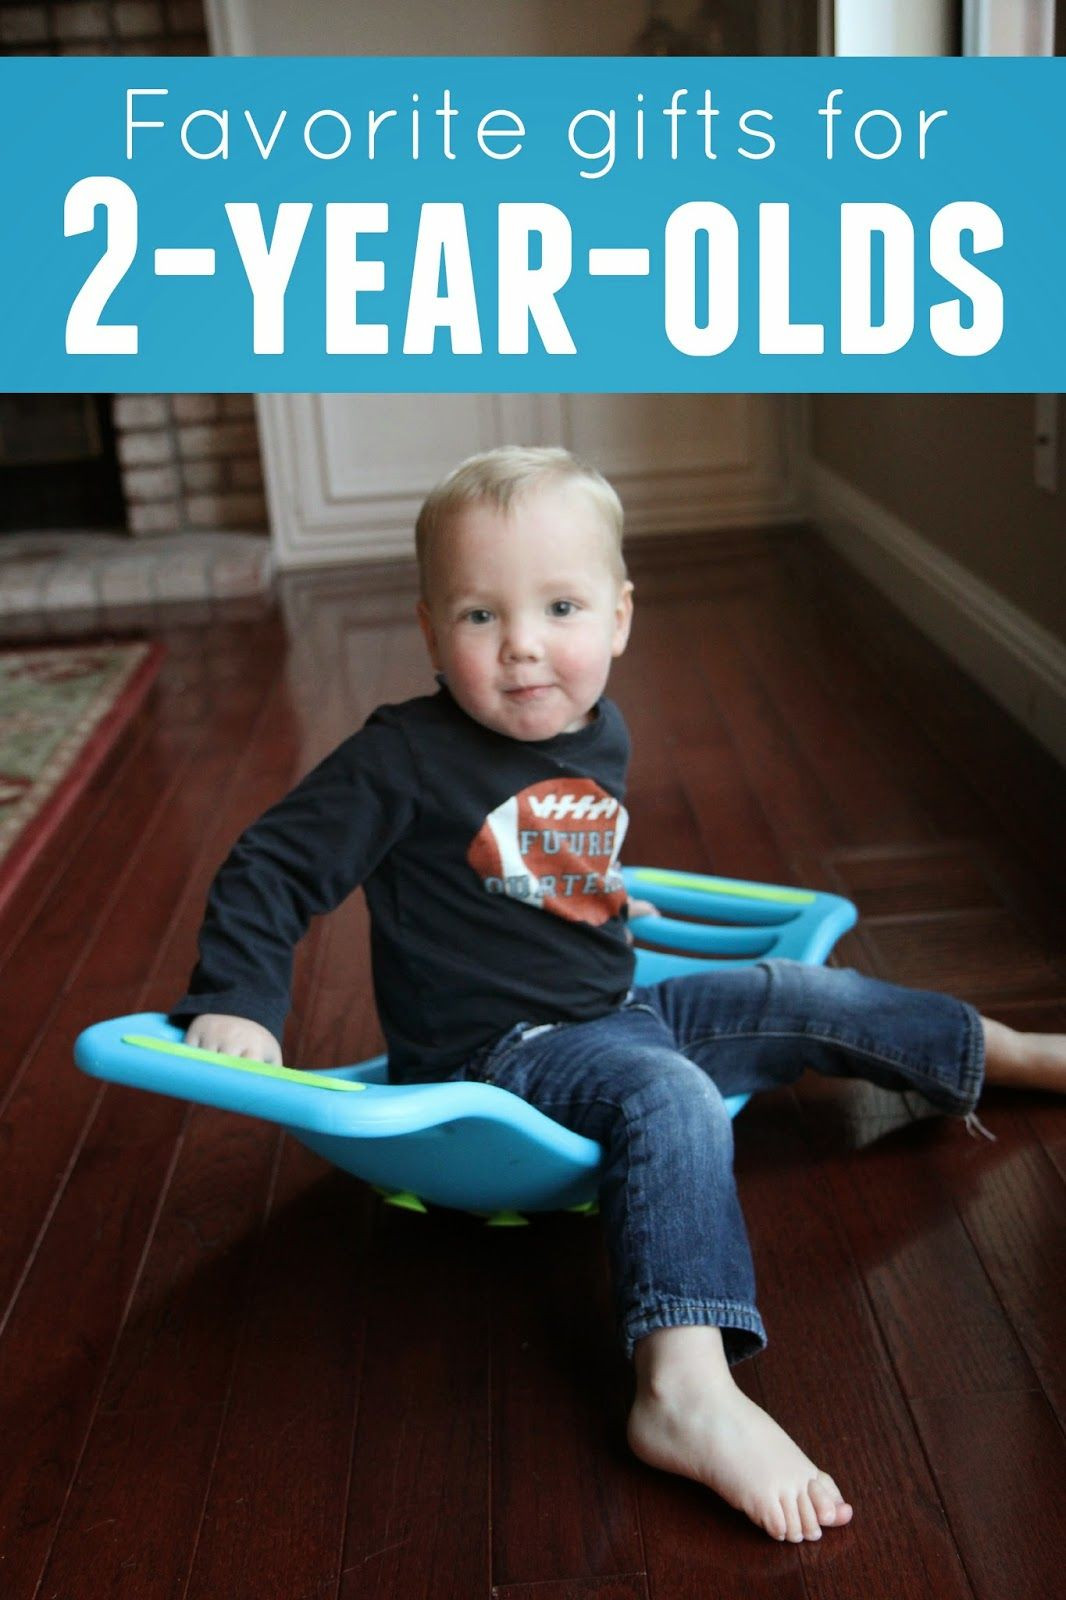 2 Year Old Boy Birthday Gift Ideas
 Favorite Gifts for 2 Year Olds Colton